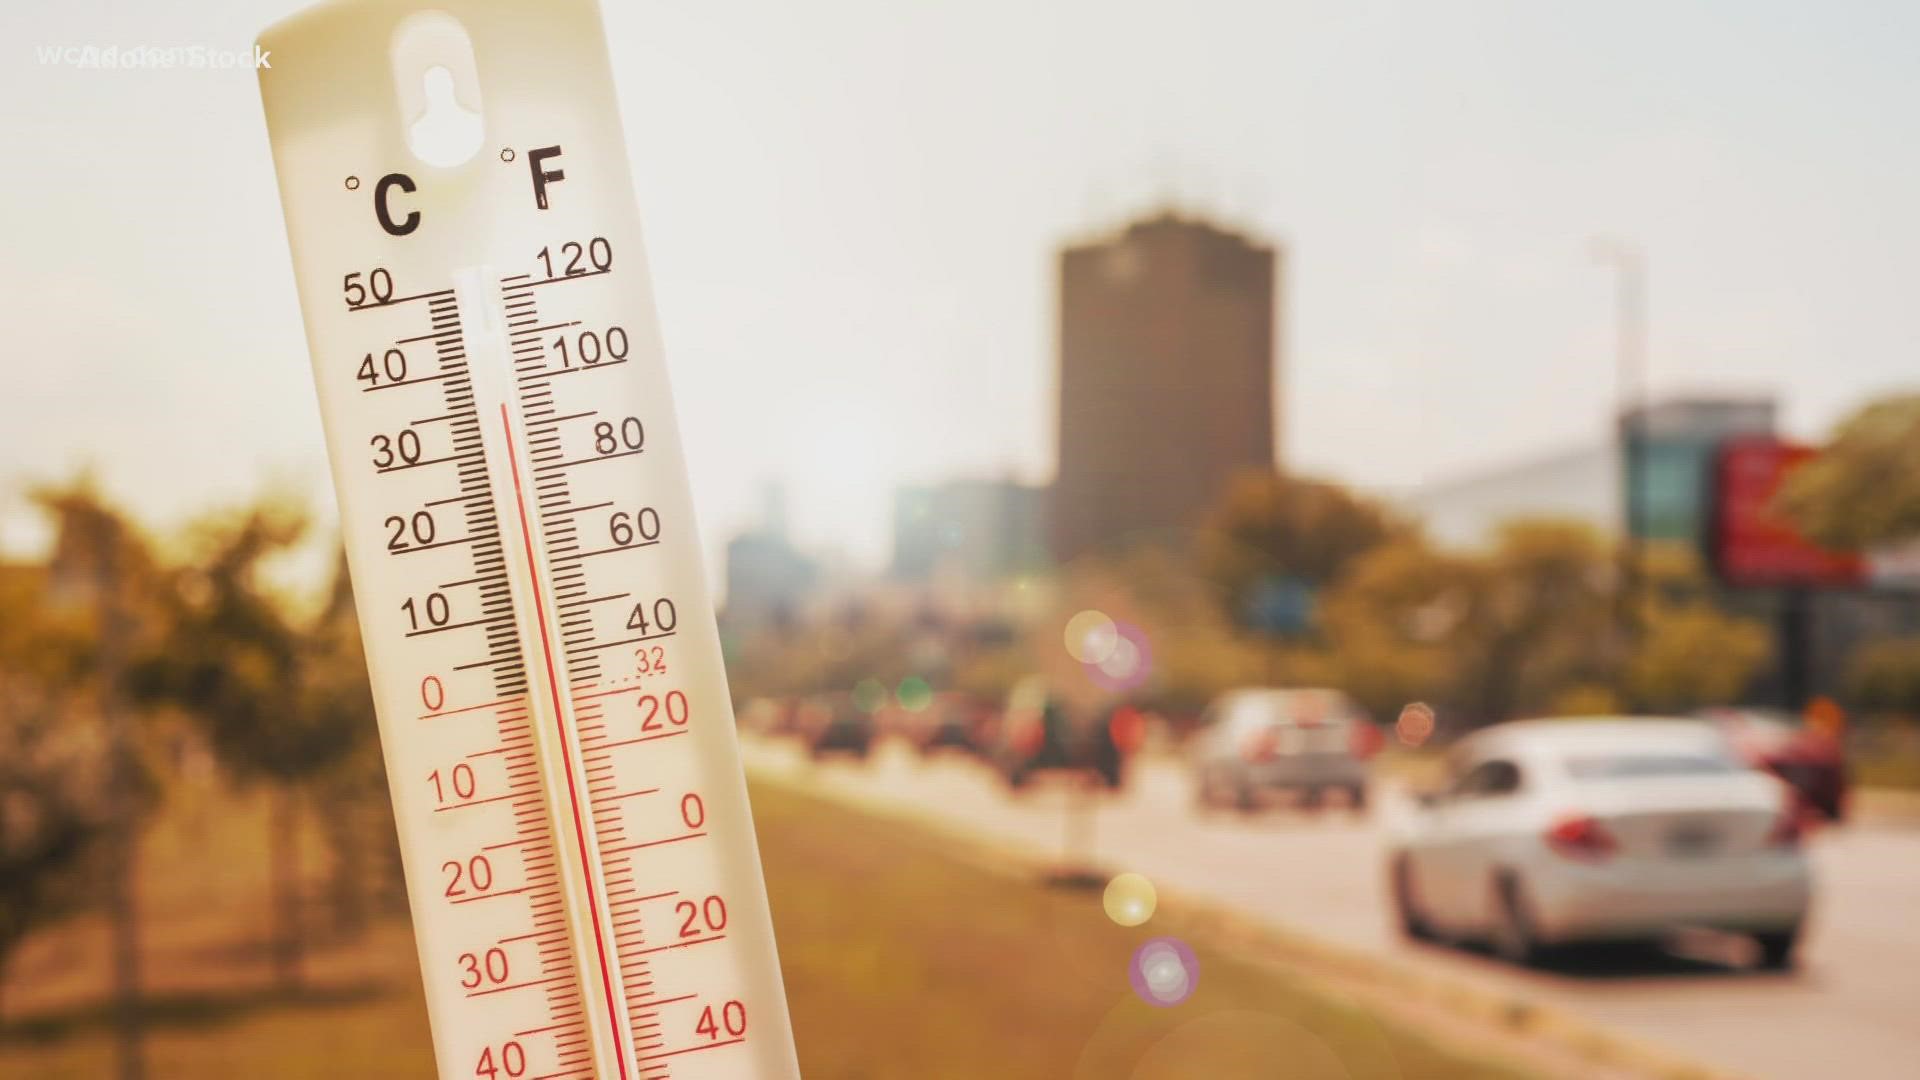 A new report says extreme heat could kill more people, reduce productivity and hurt economies around the world.